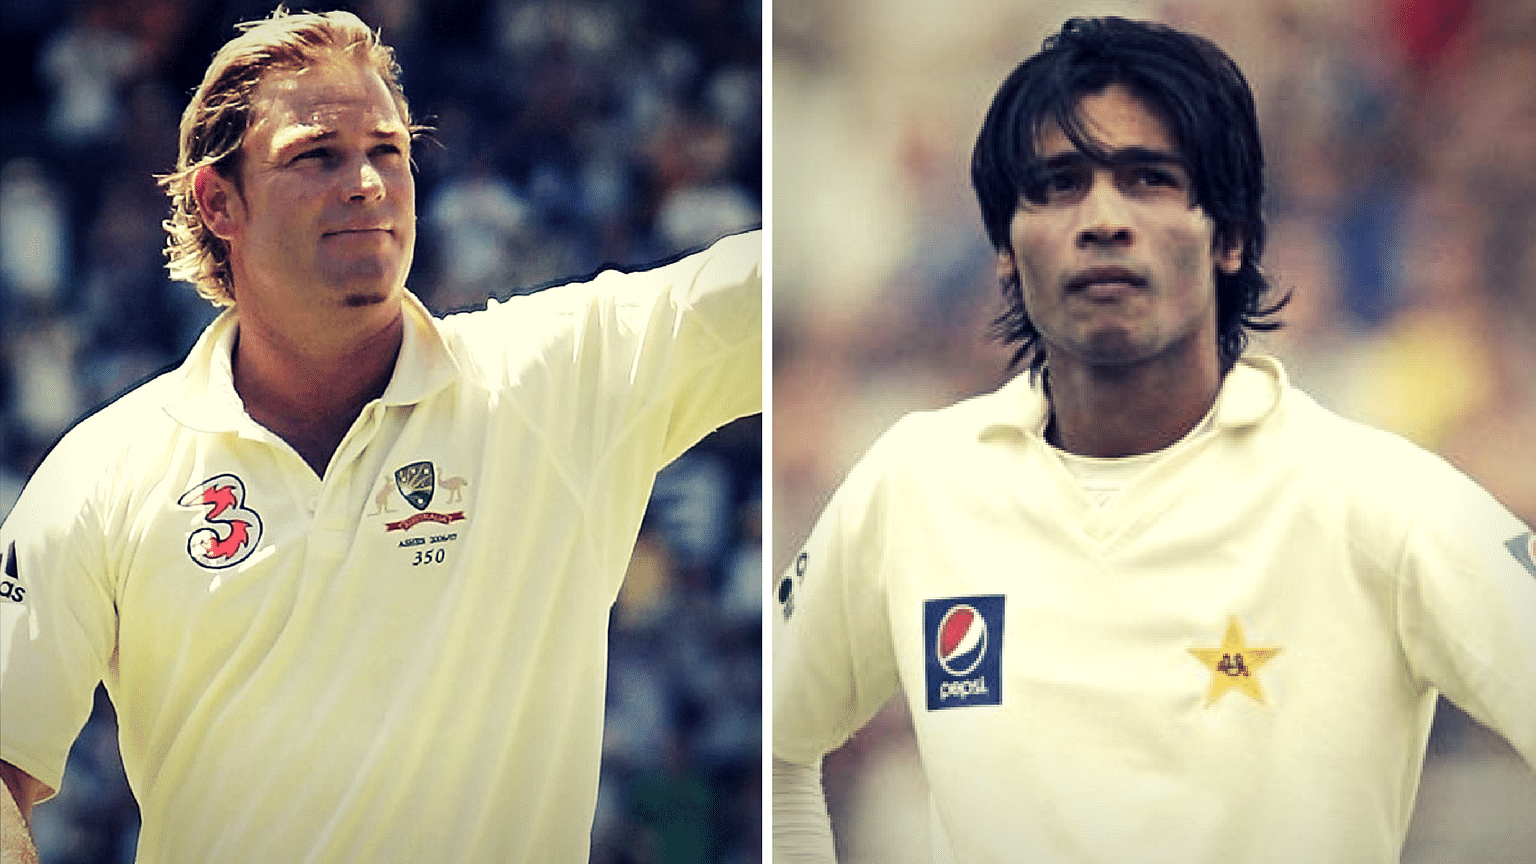 Shane Warne (left) &amp; Mohammad Amir came back from suspension to win laurels for their team.